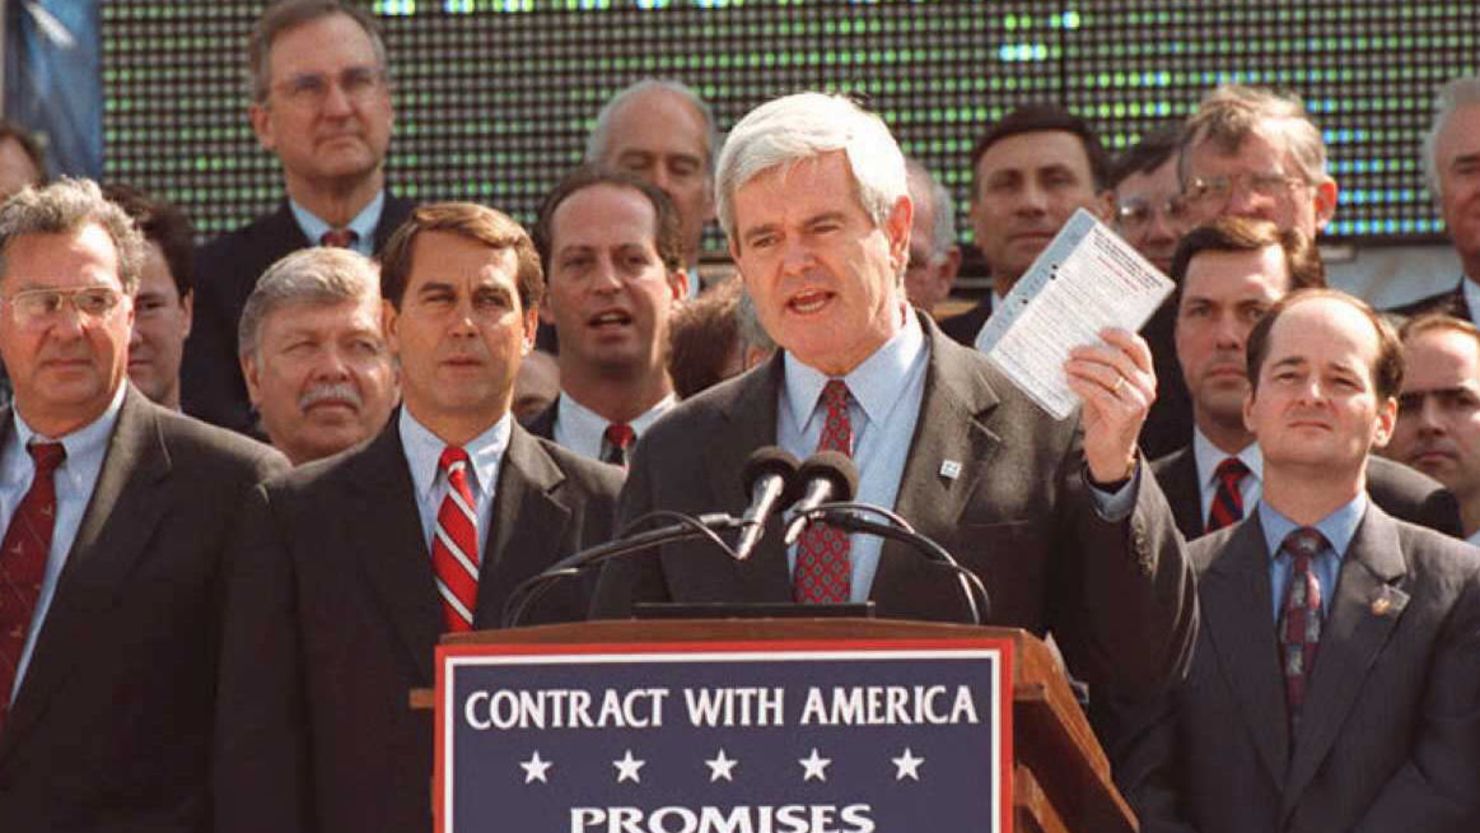 Newt Gingrich, speaker of the house in 1995, holds up a copy of the Contract With America on the steps of the U.S. Capitol. 